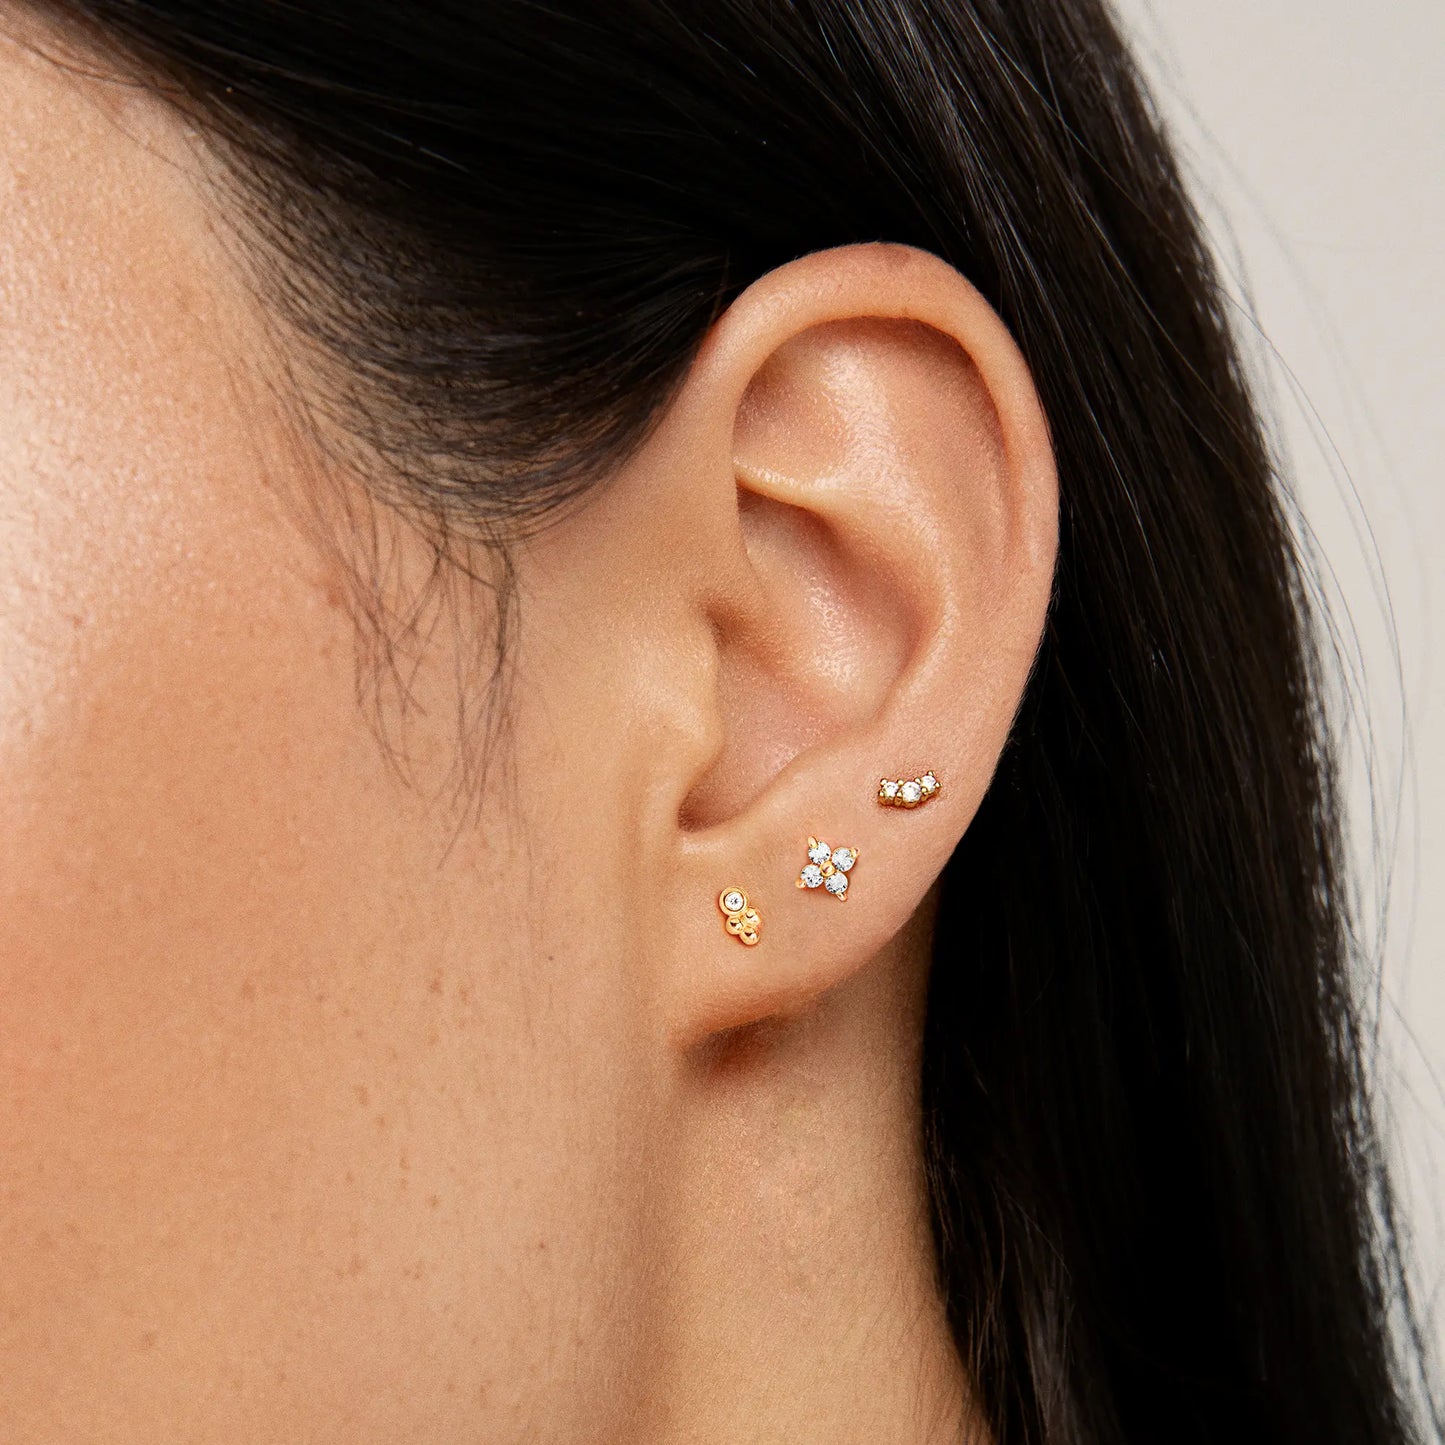 The    Clarity Studs by  Francesca Jewellery from the Earrings Collection.